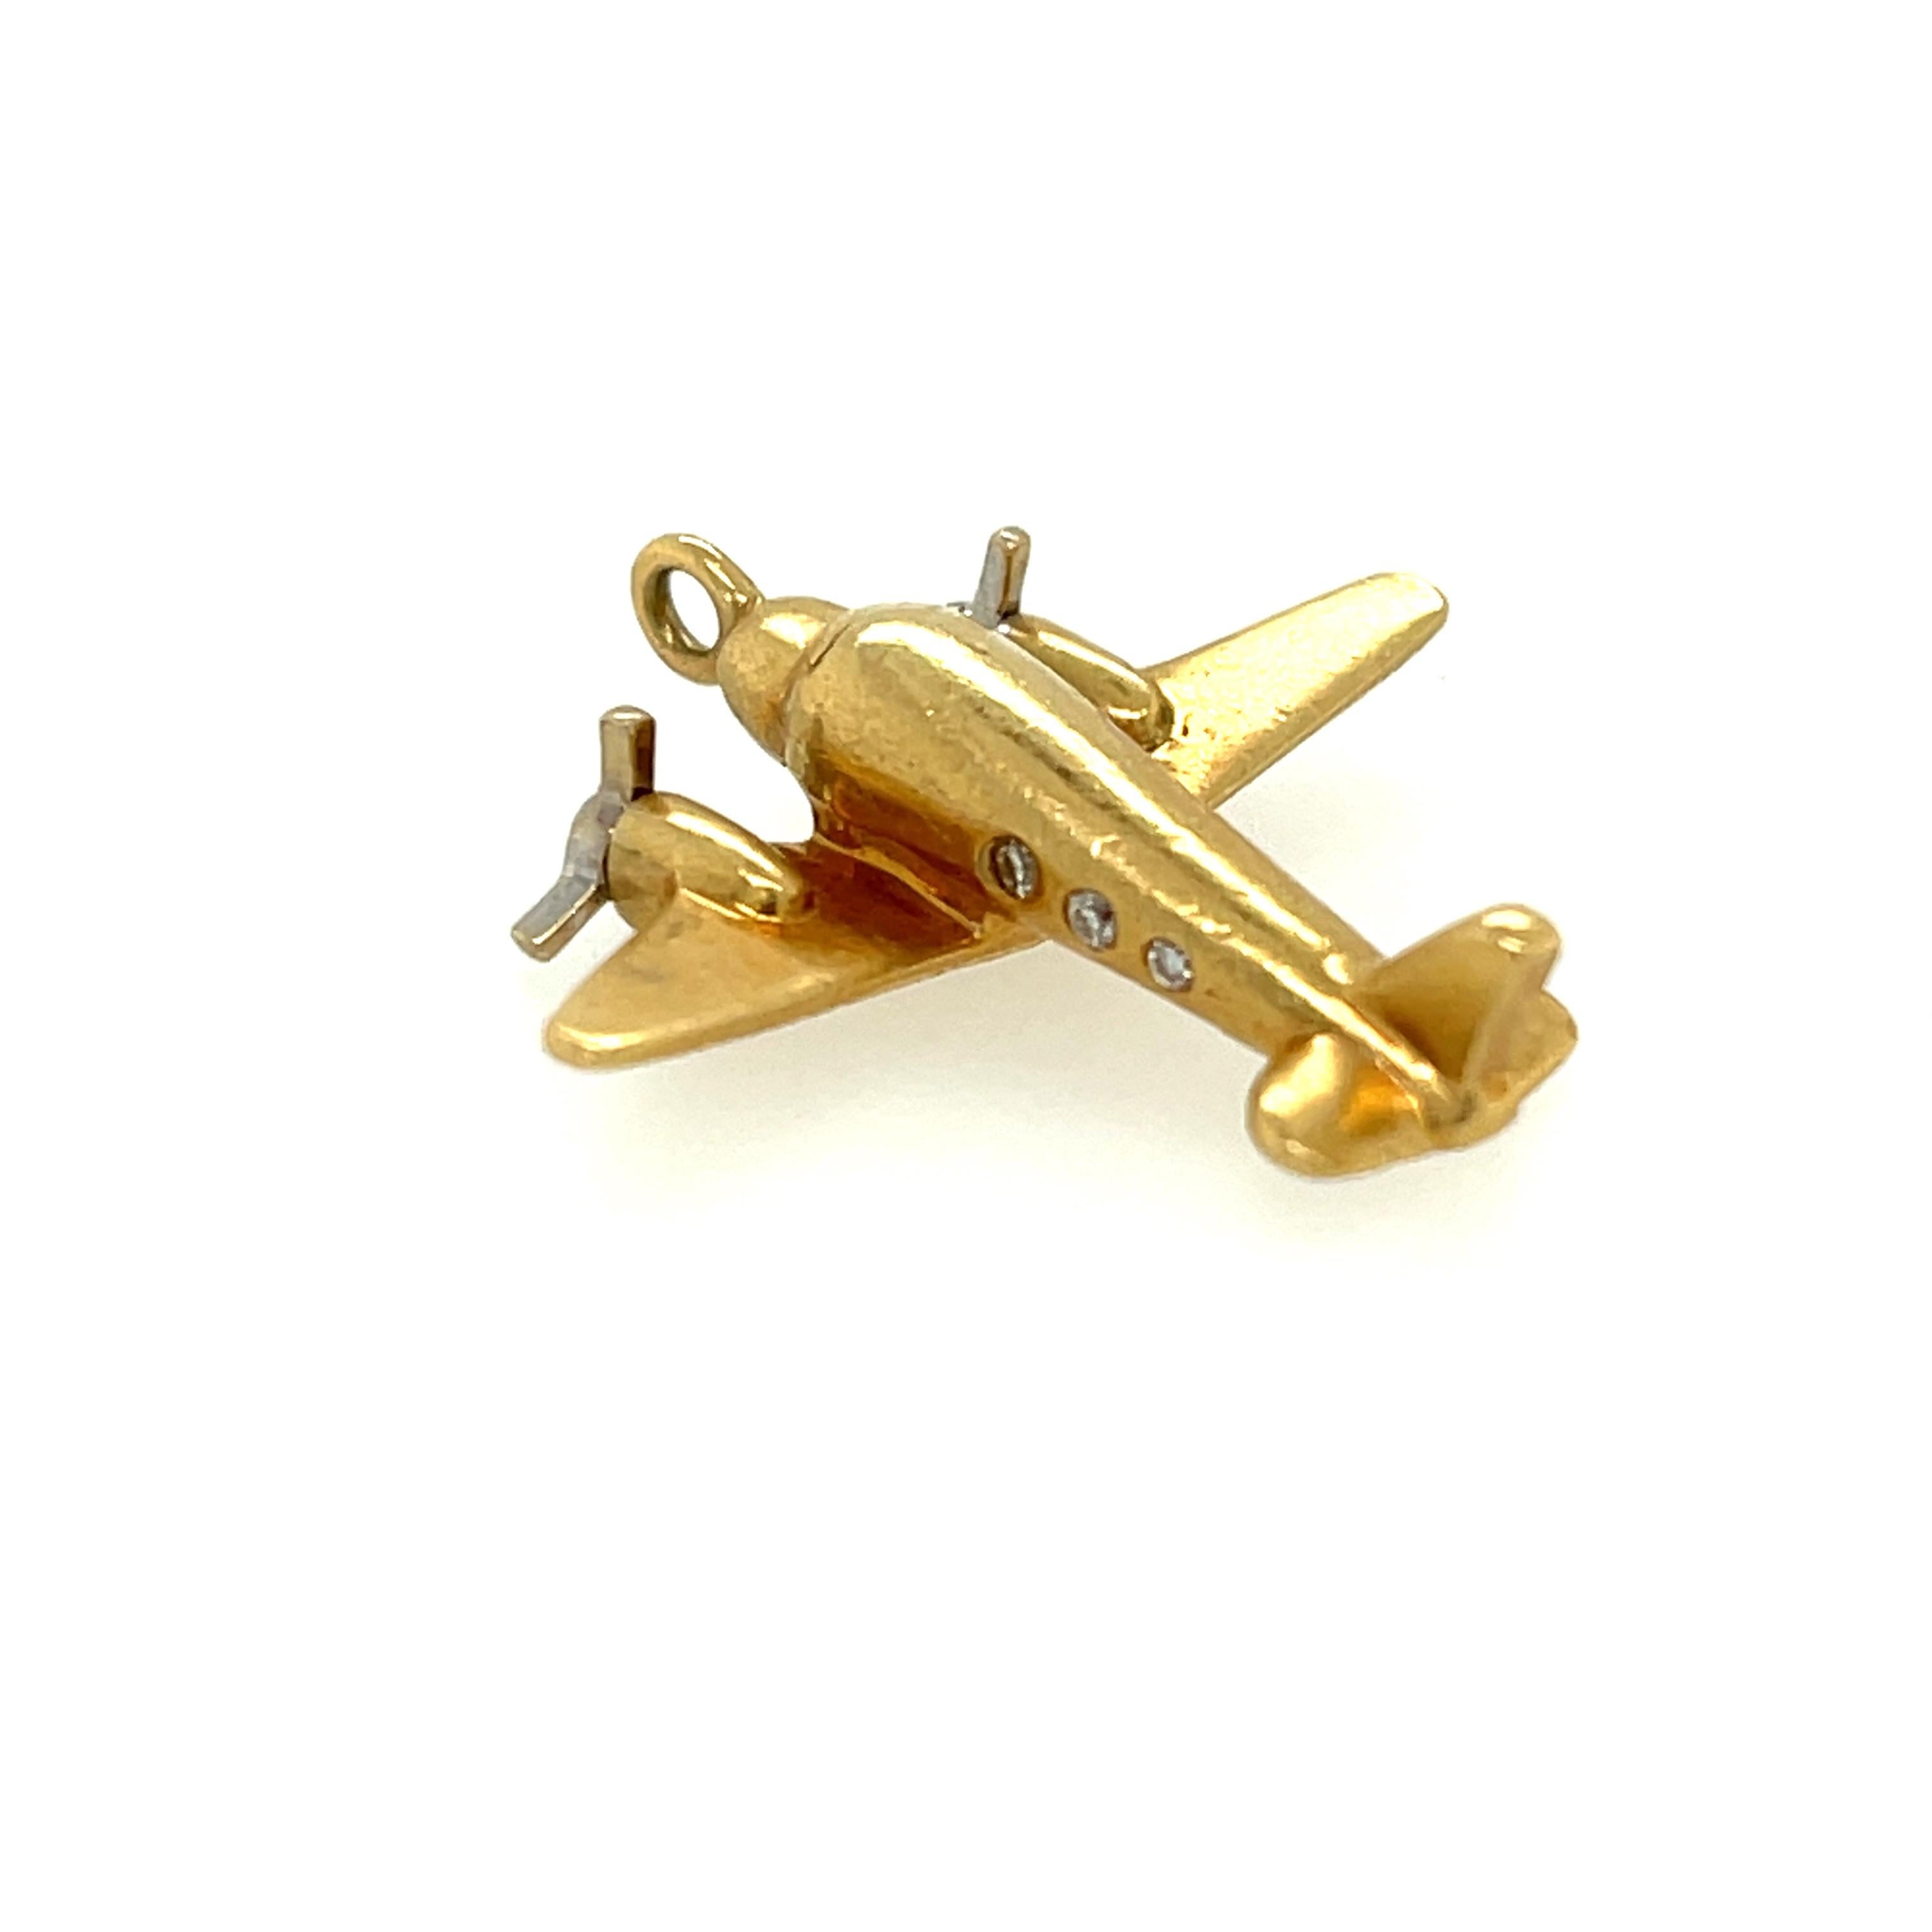 Vintage 18k model airplane charm by Tiffany & Co. Circa 1990. The charm has small diamonds set in the plane as windows. The charm has moveable propellers and is a vintage model plane. The charm is 3/4 inch long. It is stamped T & Co. 750. It weighs